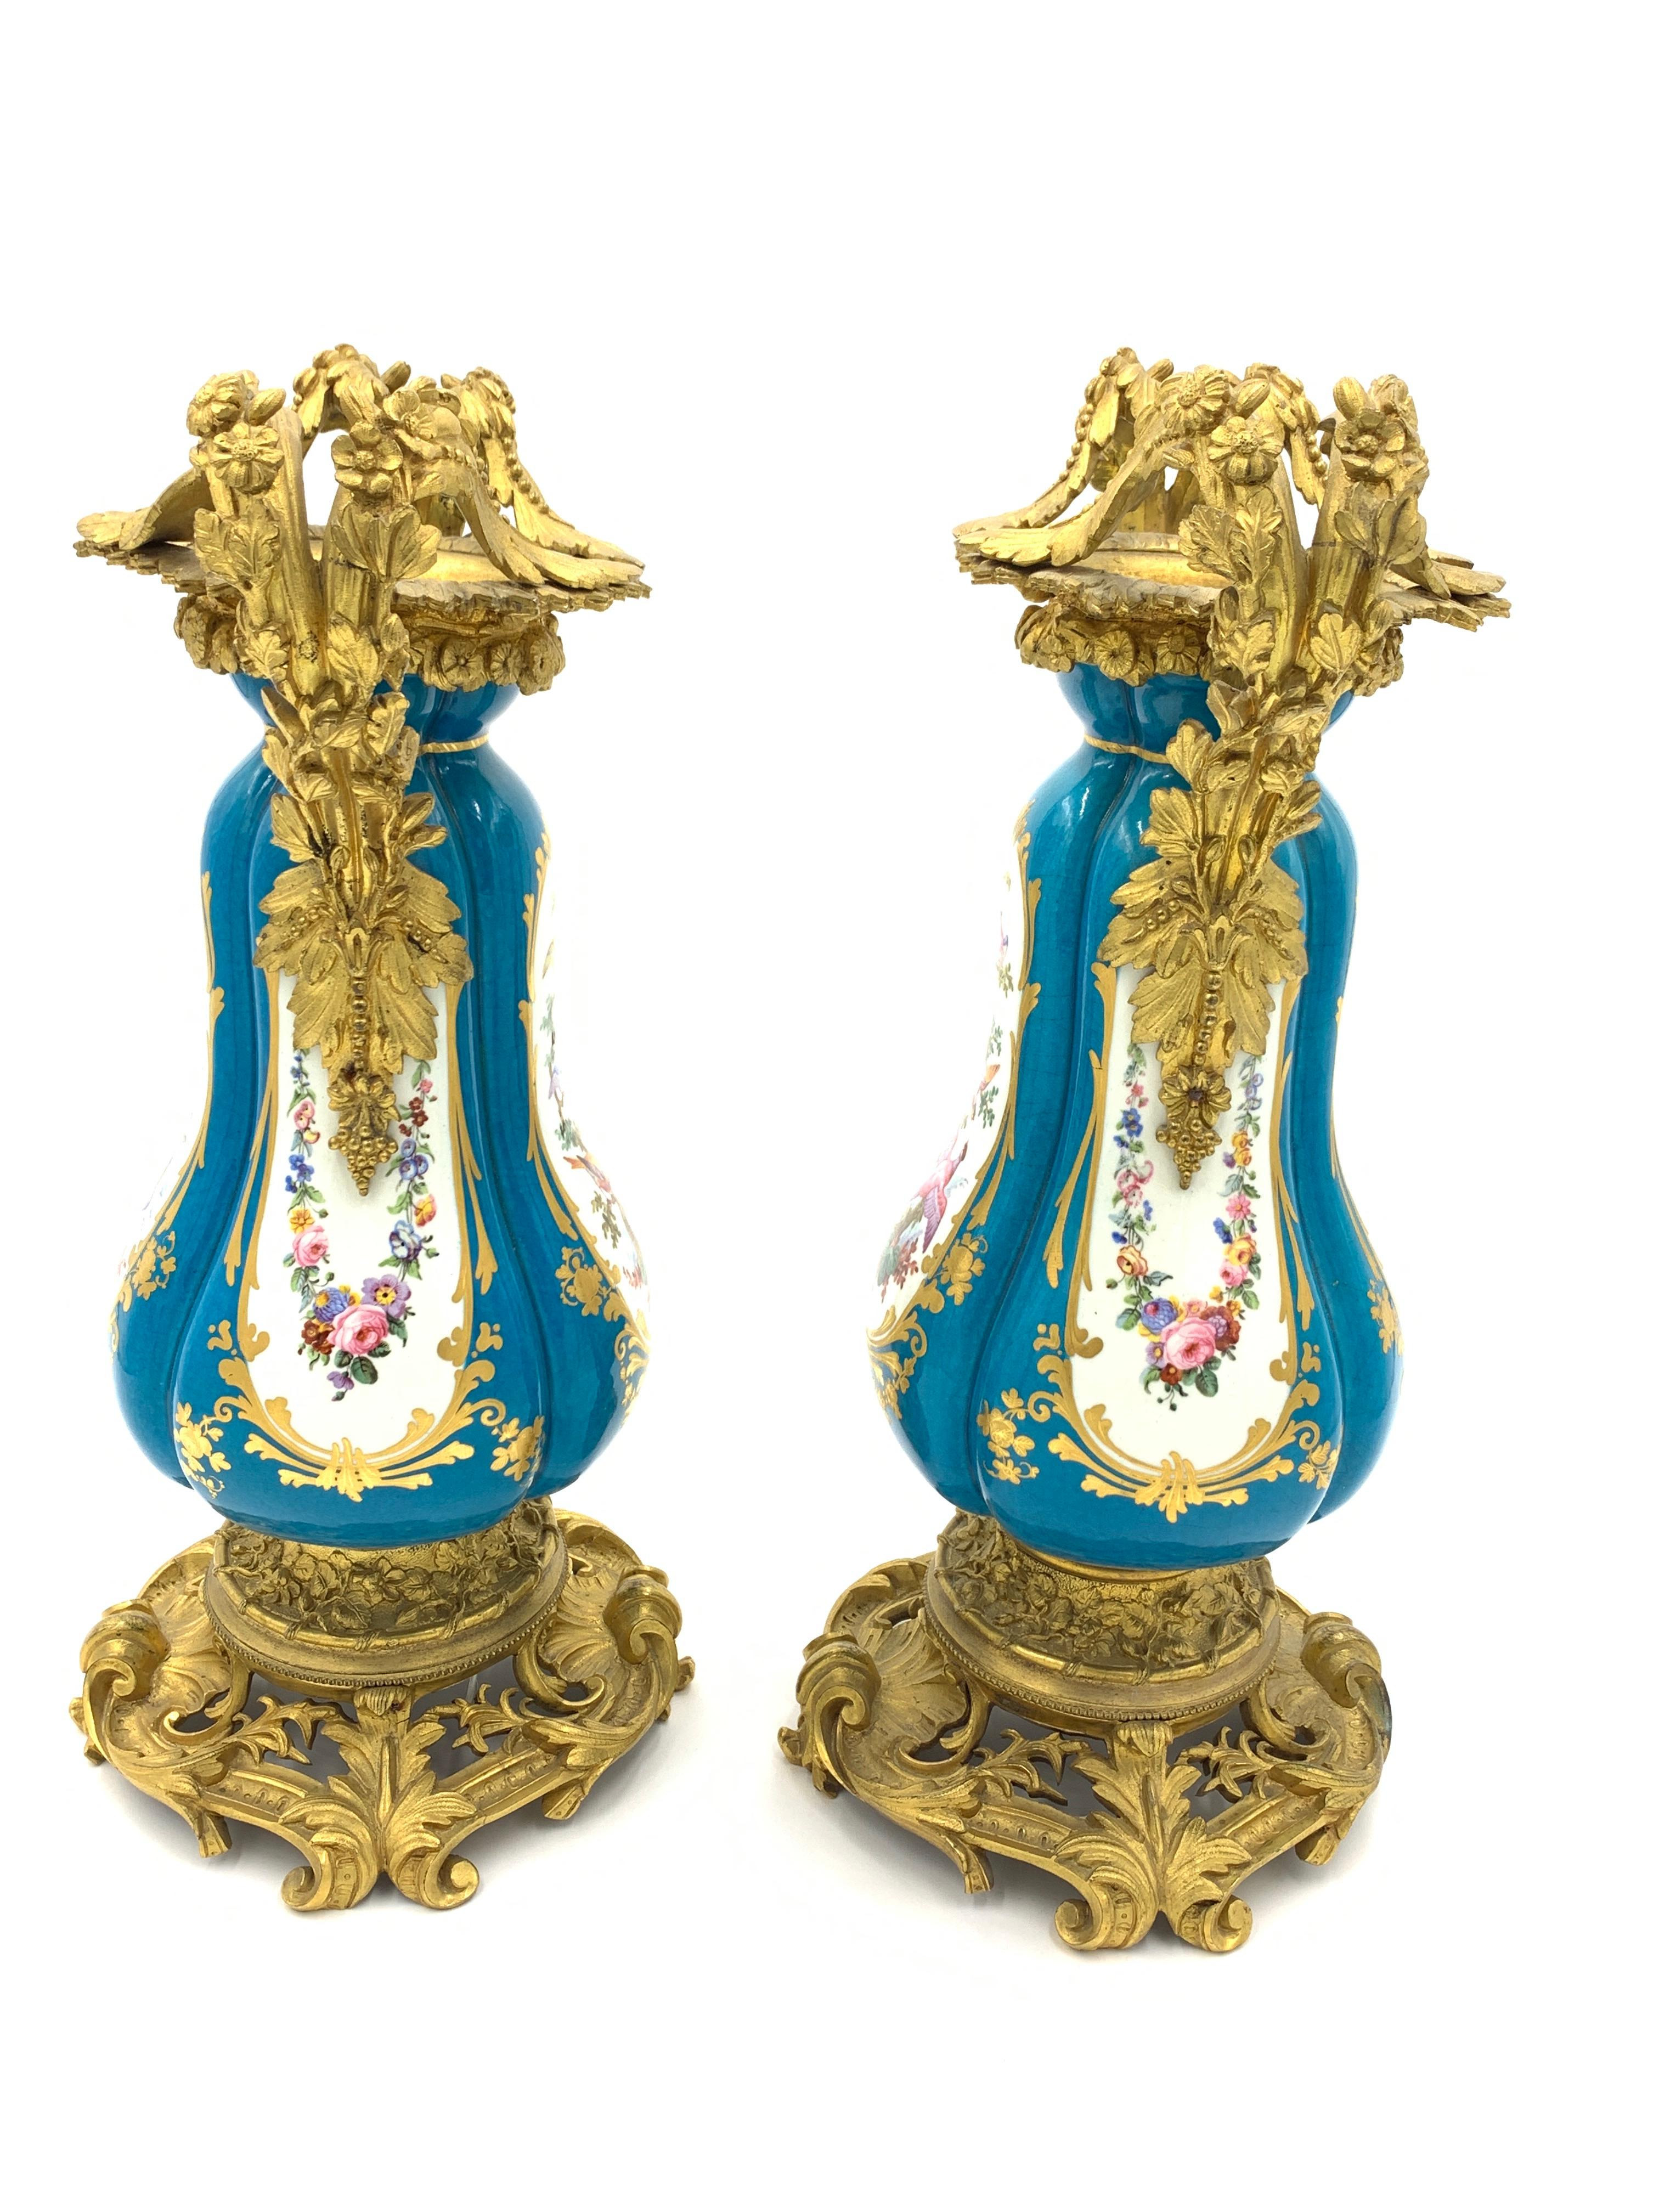 Fine sky blue sevres style vases with gilded ormolu mounts around the neck, sides and the base, the pictures in the vases depicts three birds on a tree with leaves around them.
 